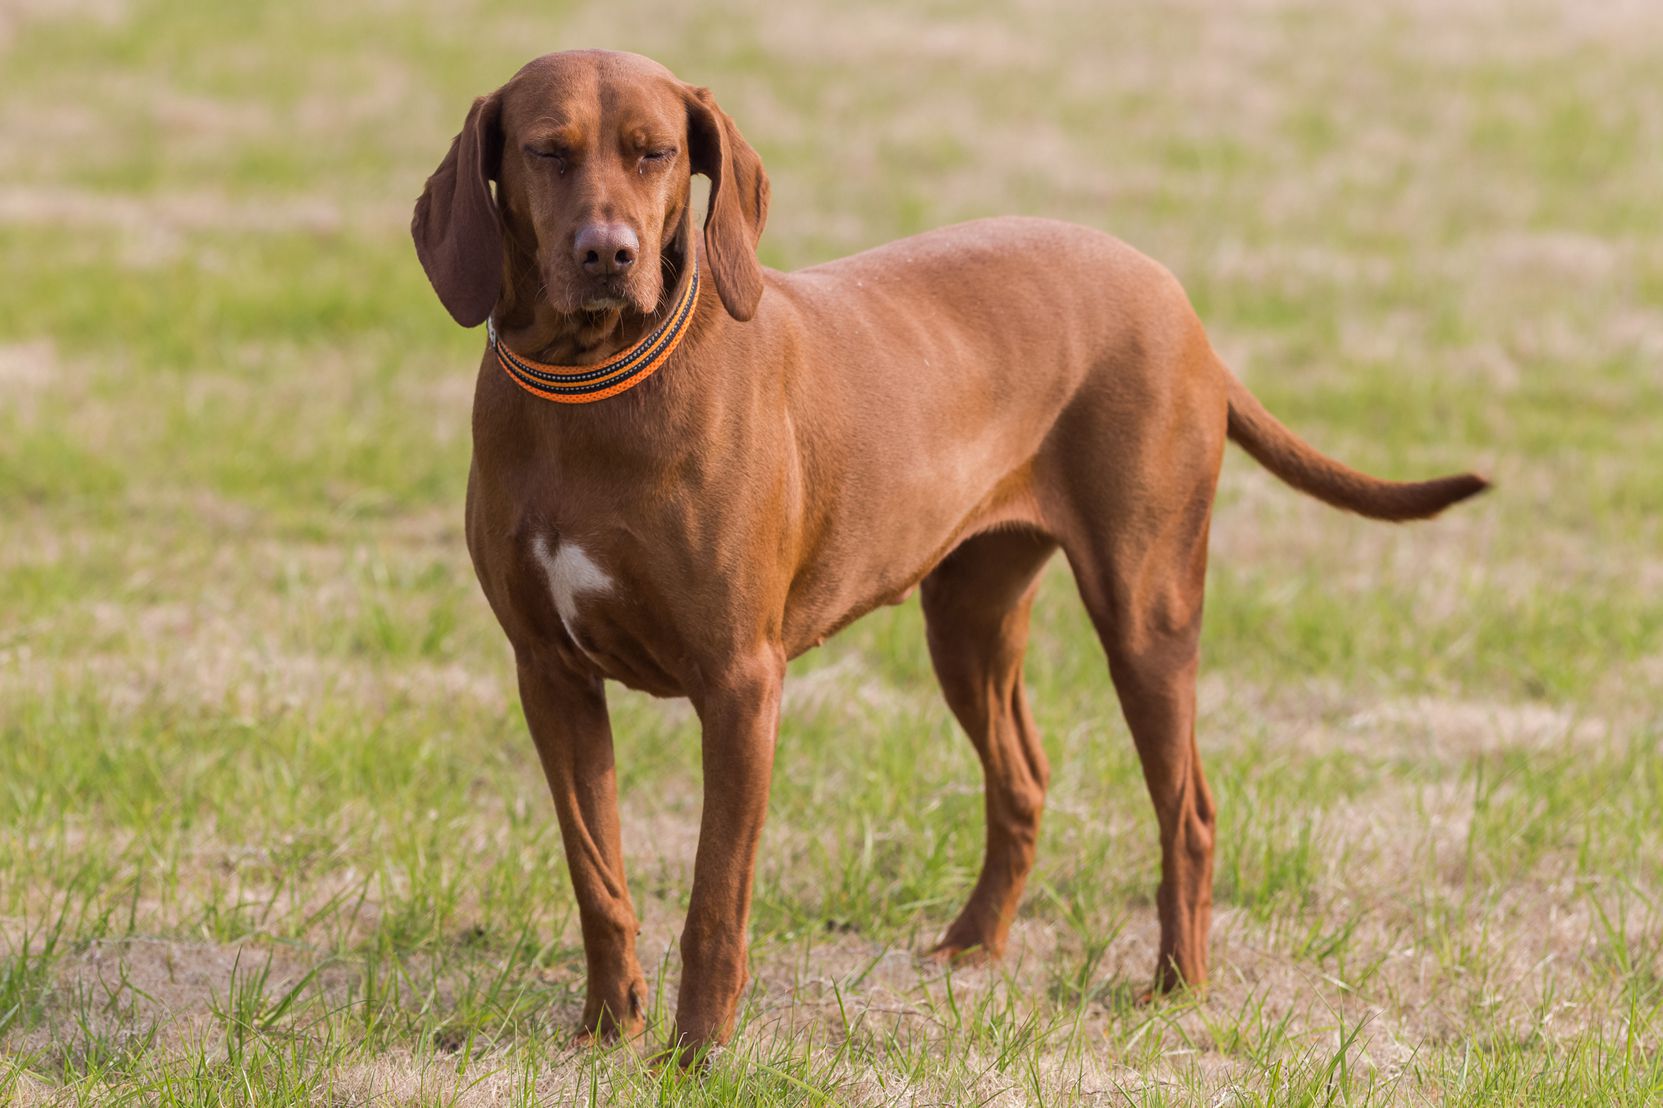 Unleashing the Redbone Coonhound Lab Mix: 6 Amazing Characteristics and Facts